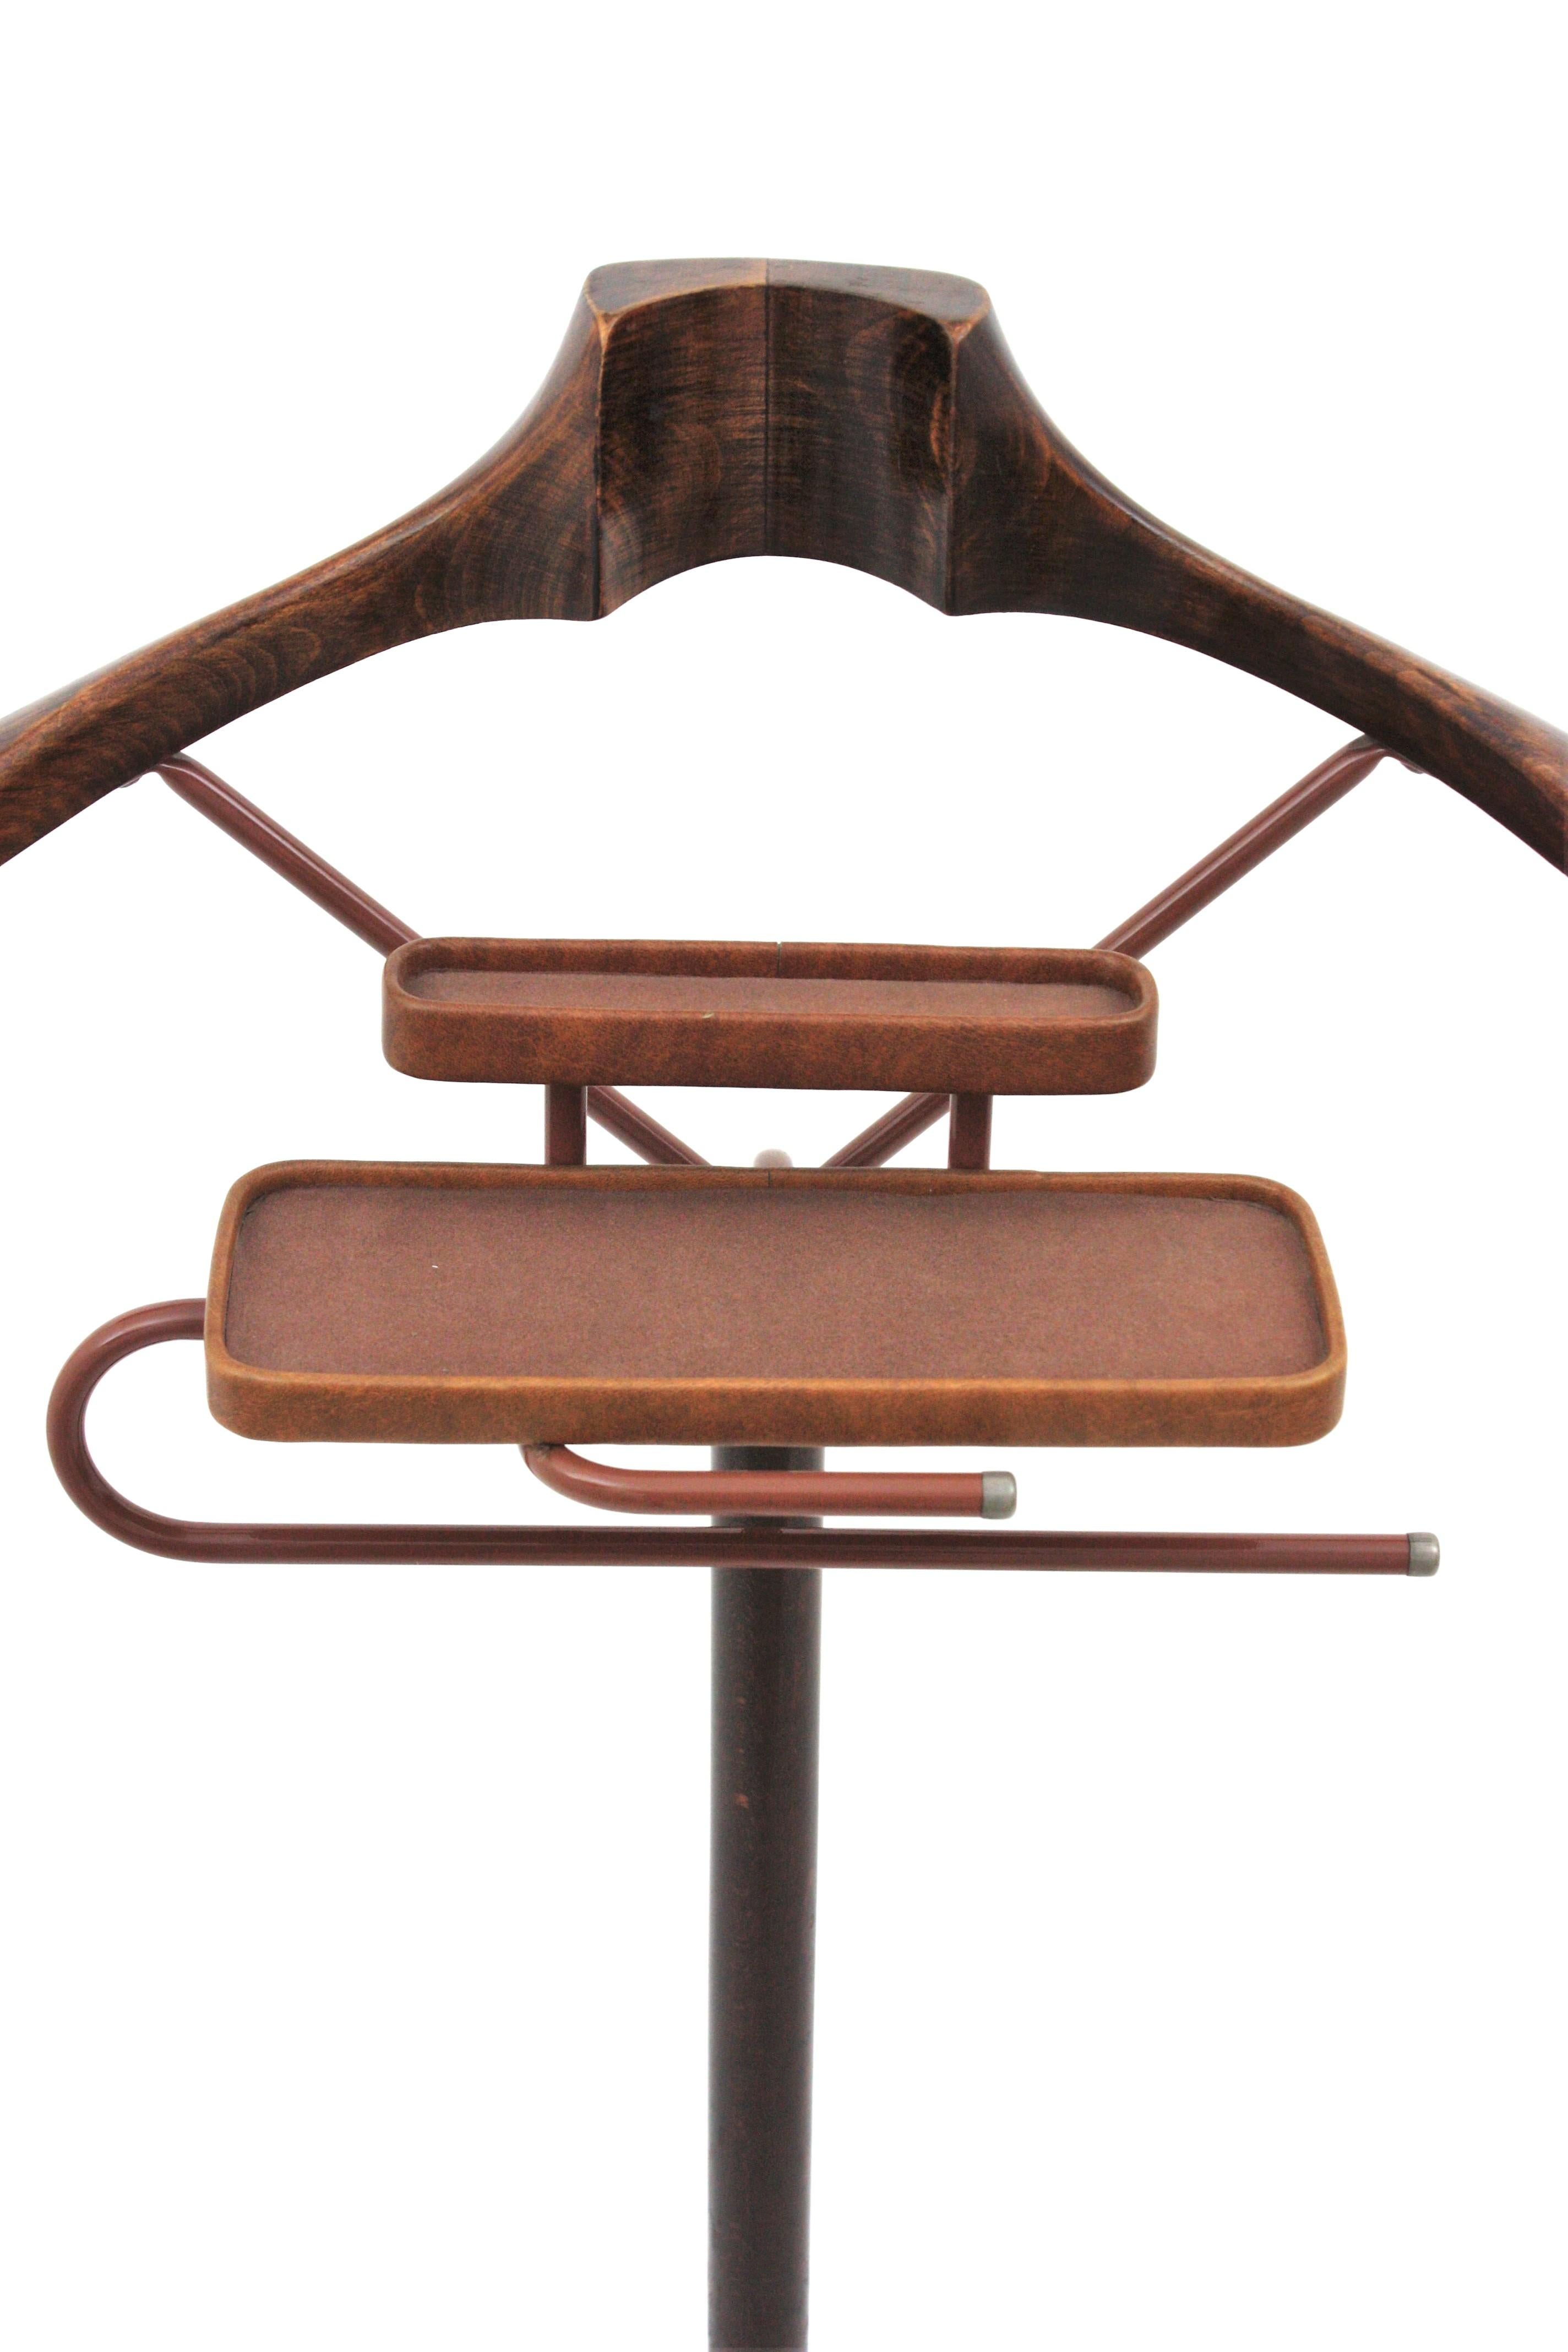 20th Century Italian Beech Wood and Acrylic Valet Stand Dressboy, 1960s For Sale